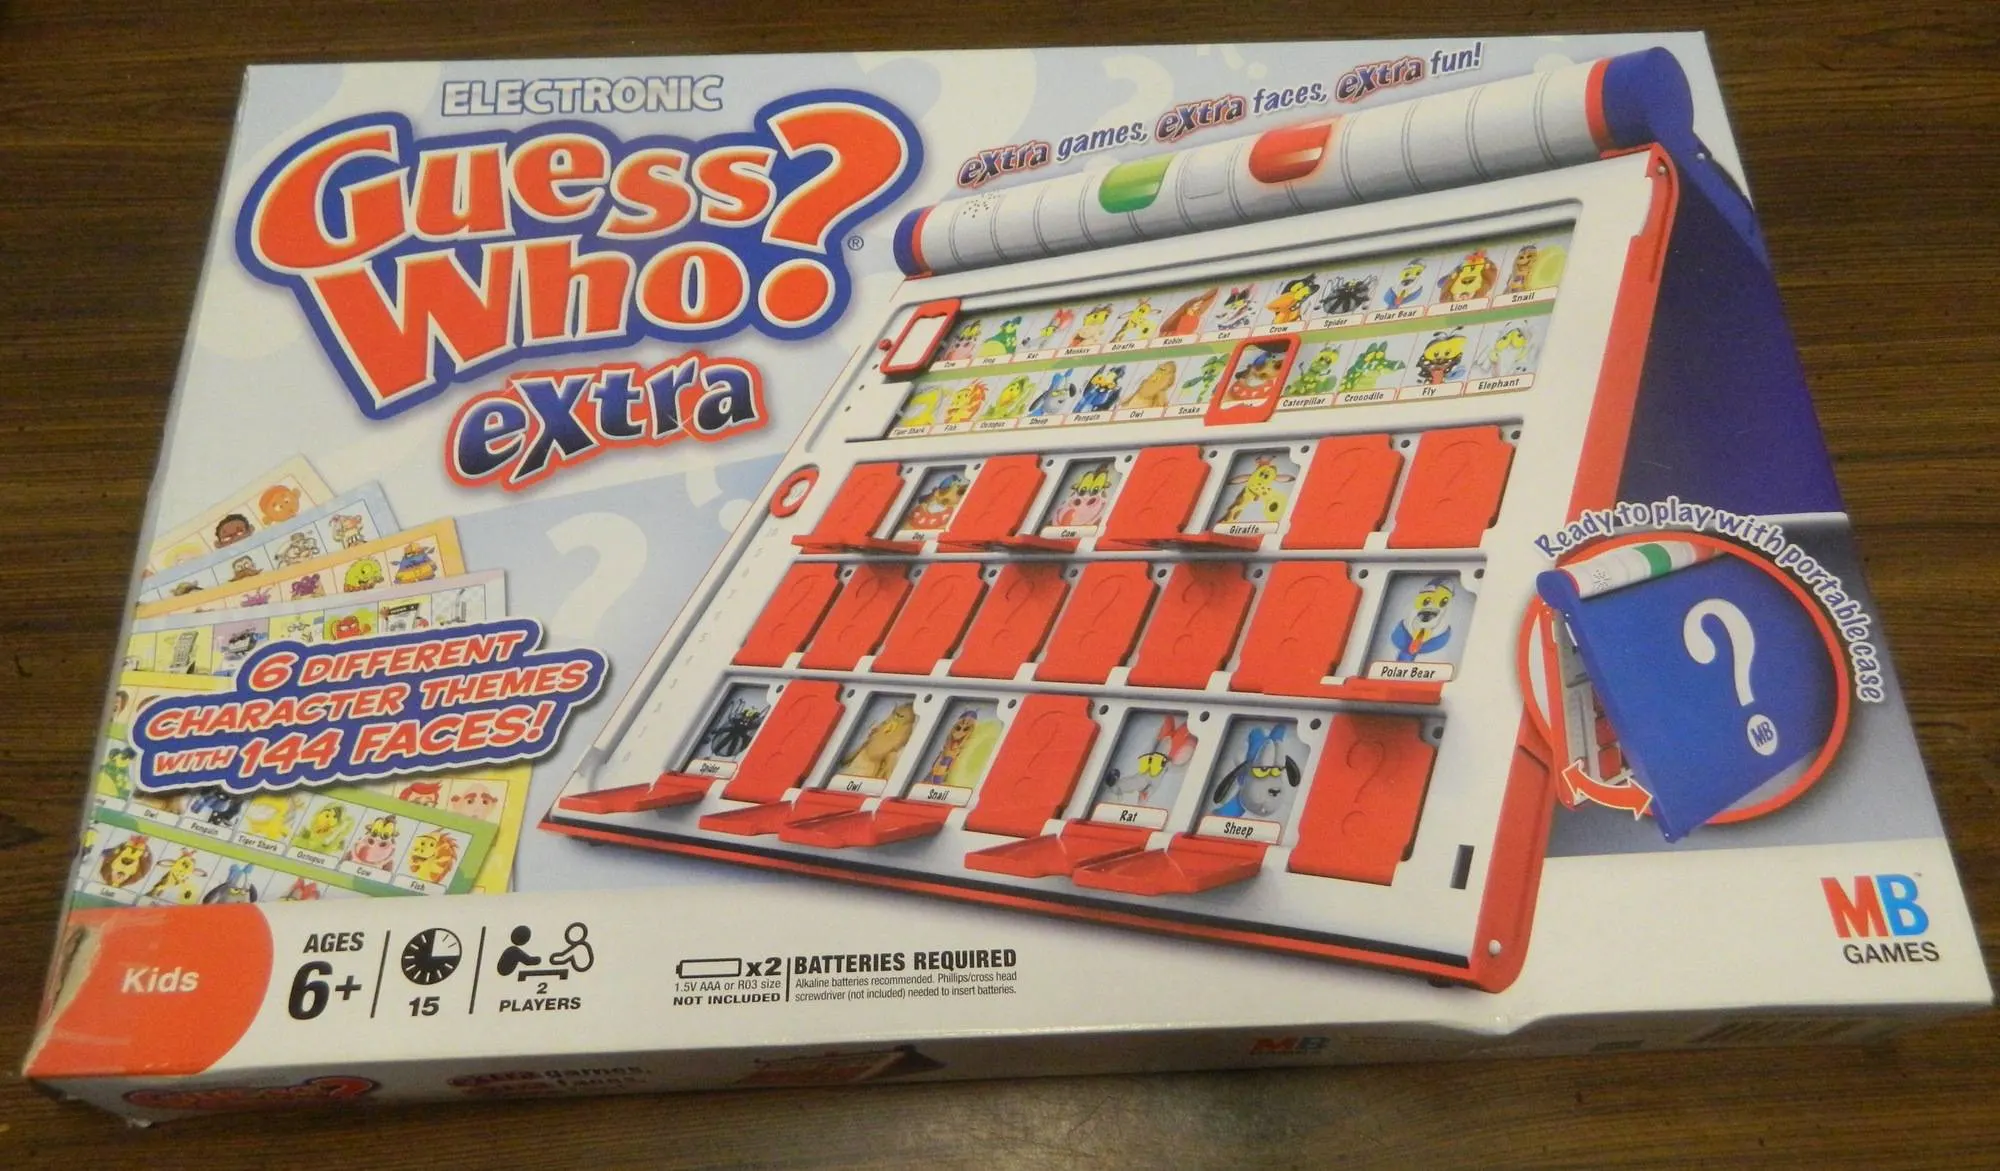 Box for Electronic Guess Who? Extra